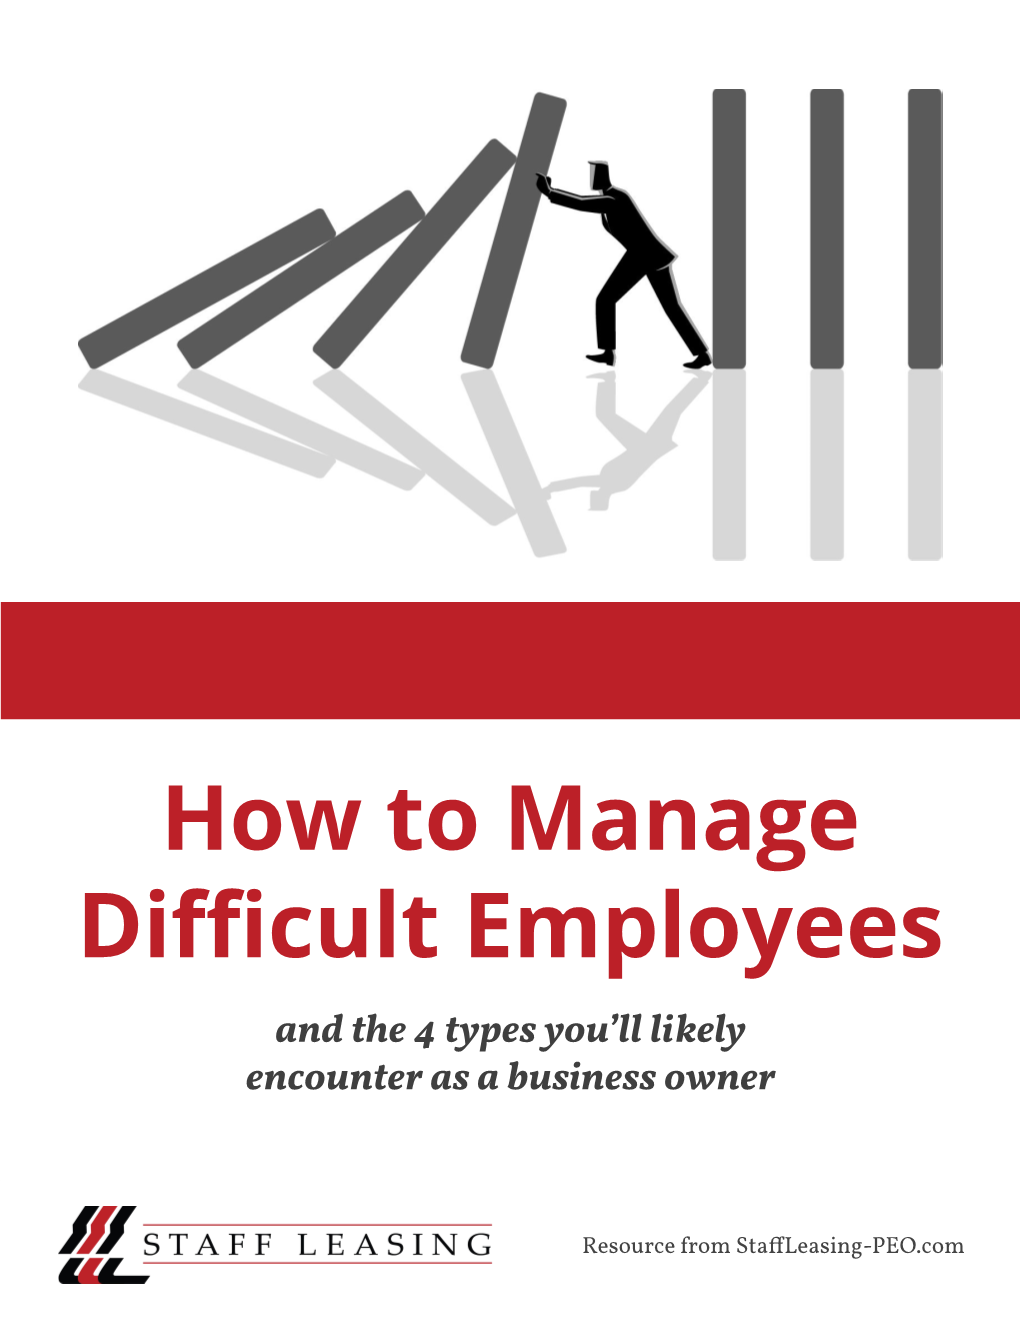 How to Manage Difficult Employees